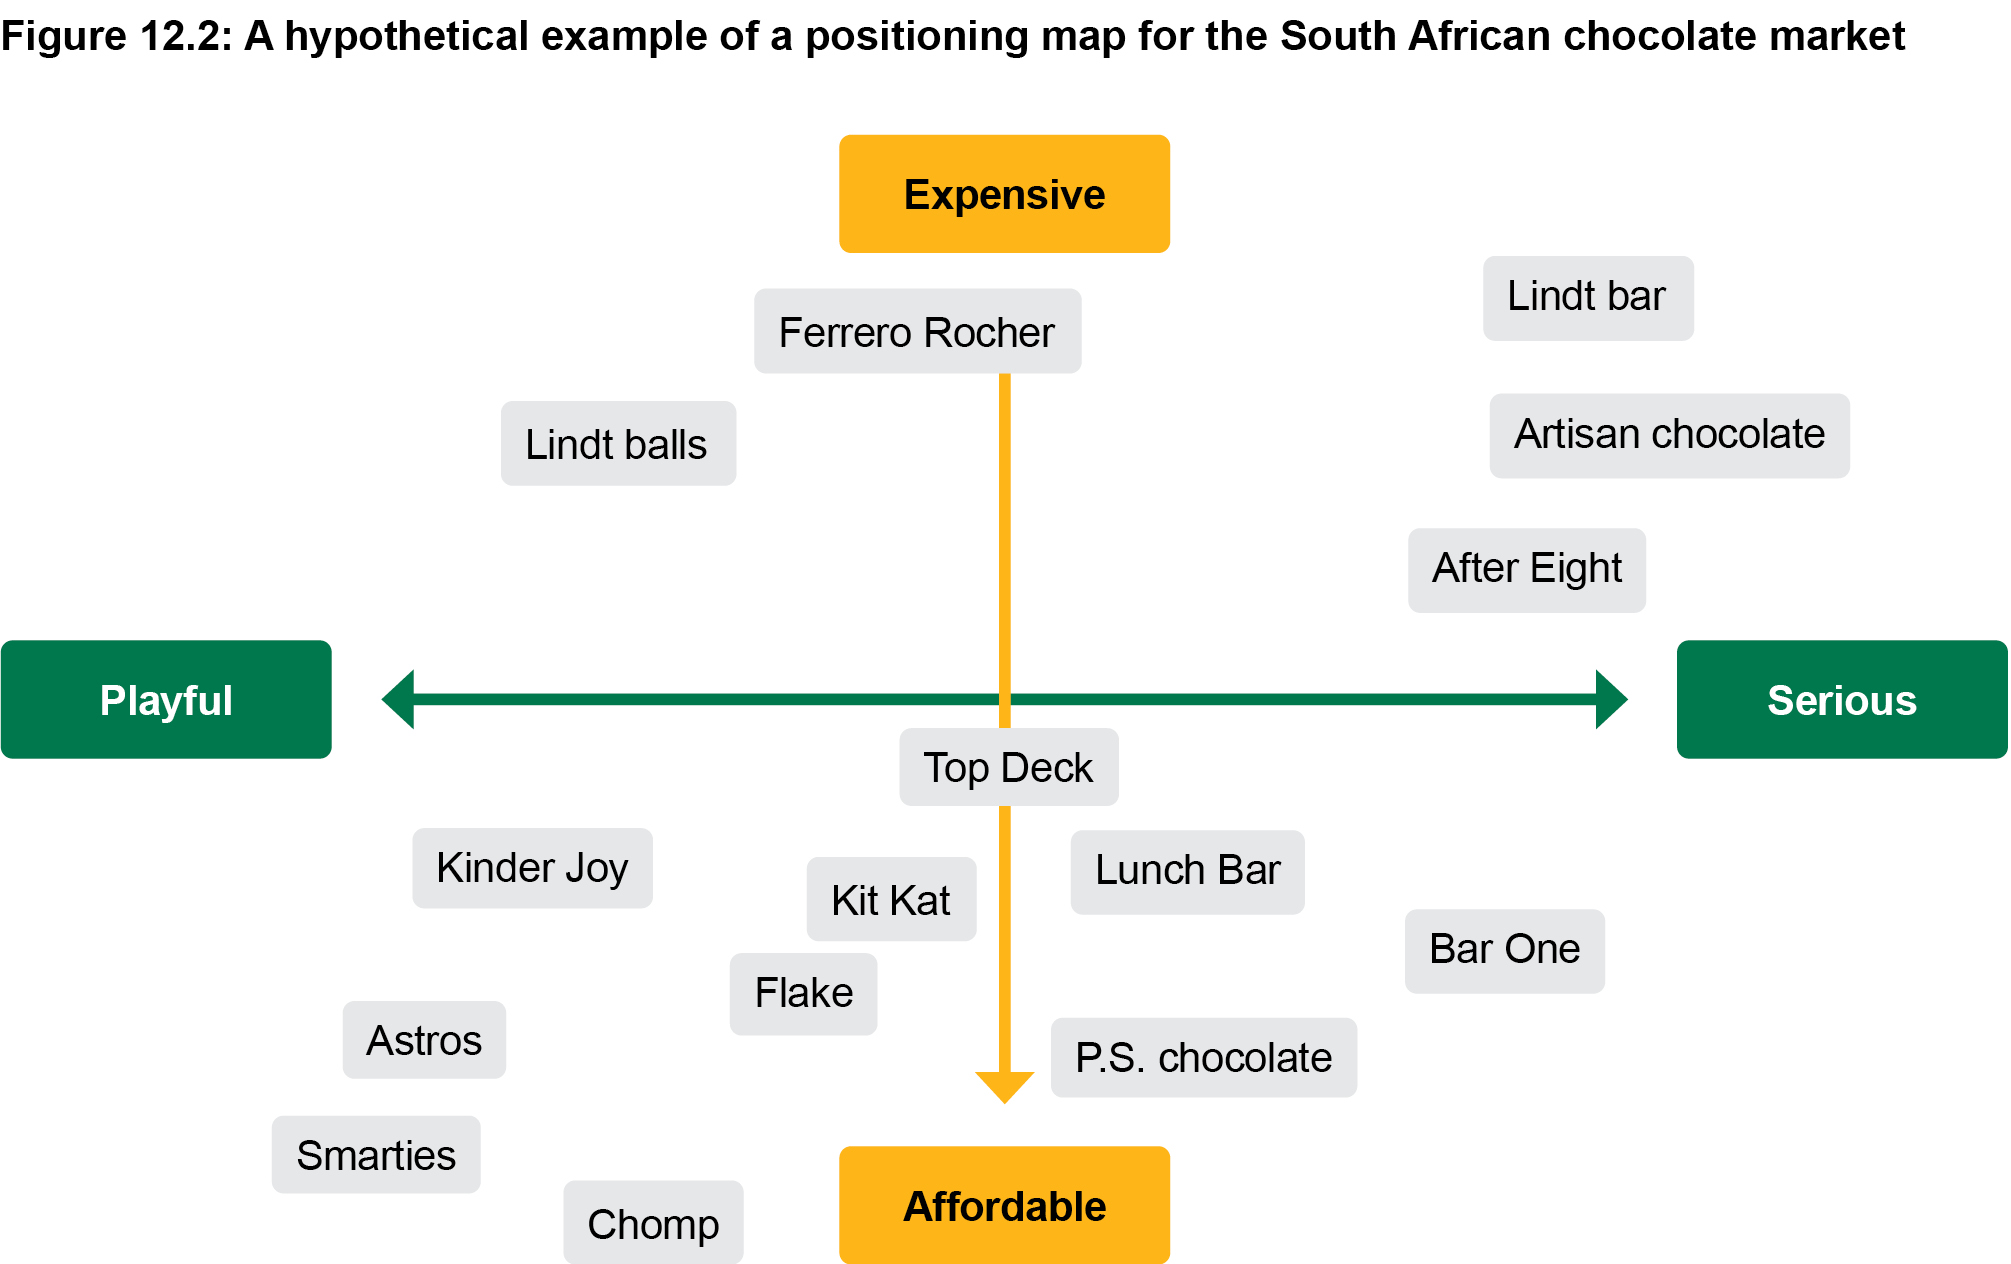 Figure 12.2: A hypotheticcal example of a positioning map for the South African chocolate market